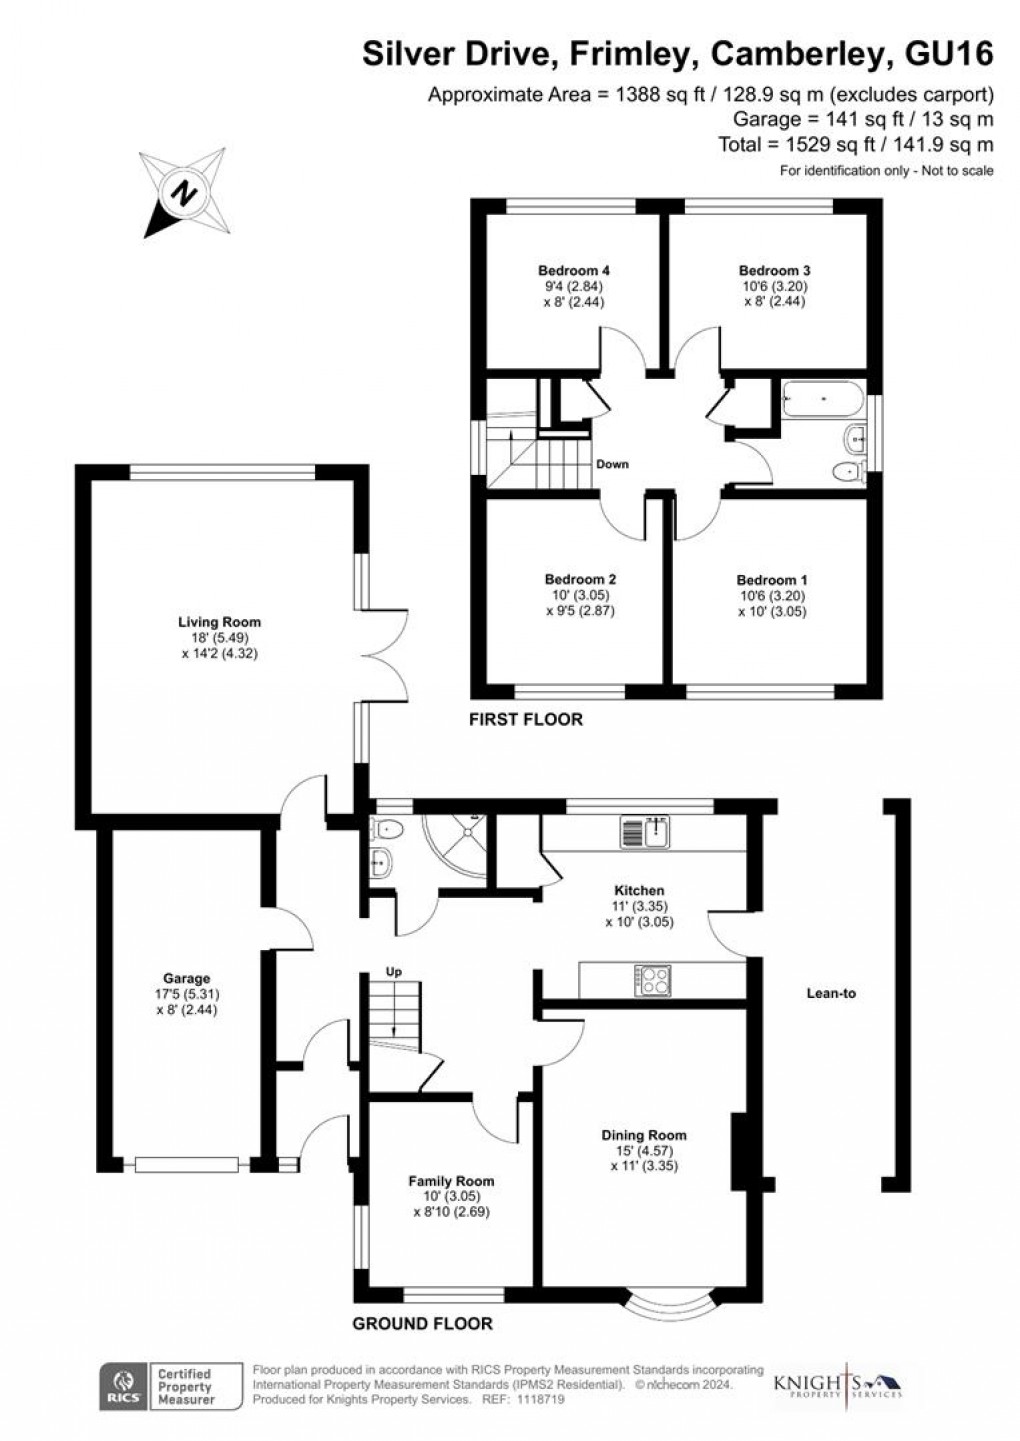 Floorplan for Silver Drive, Frimley, Camberley